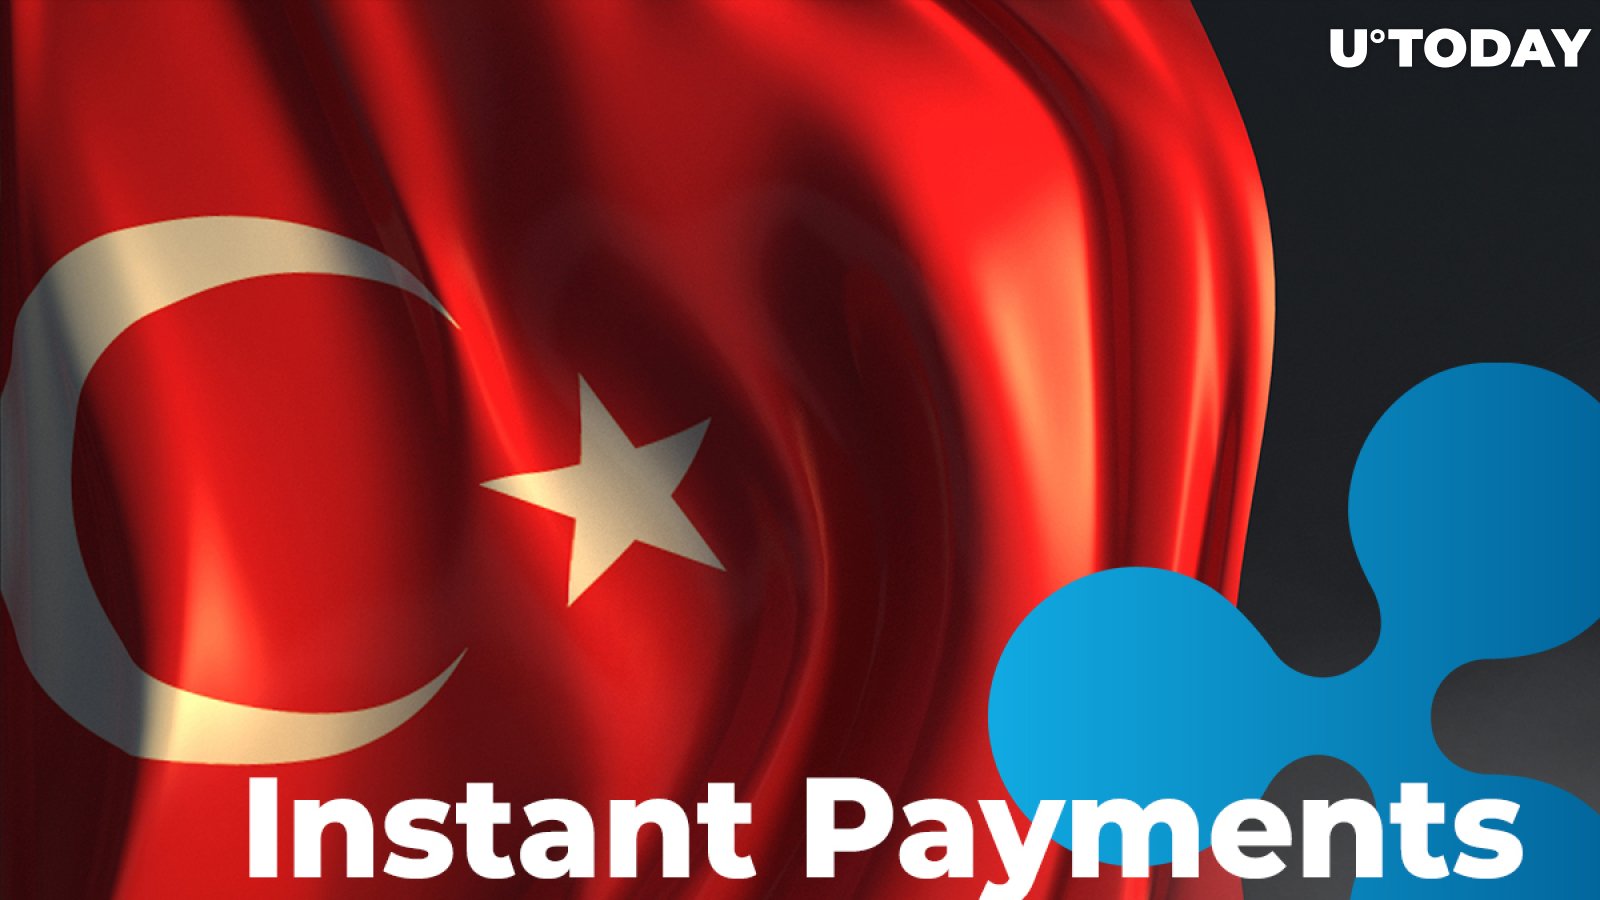 RippleNet Member BBVA to Help Turkey Implement Instant Payments This Year